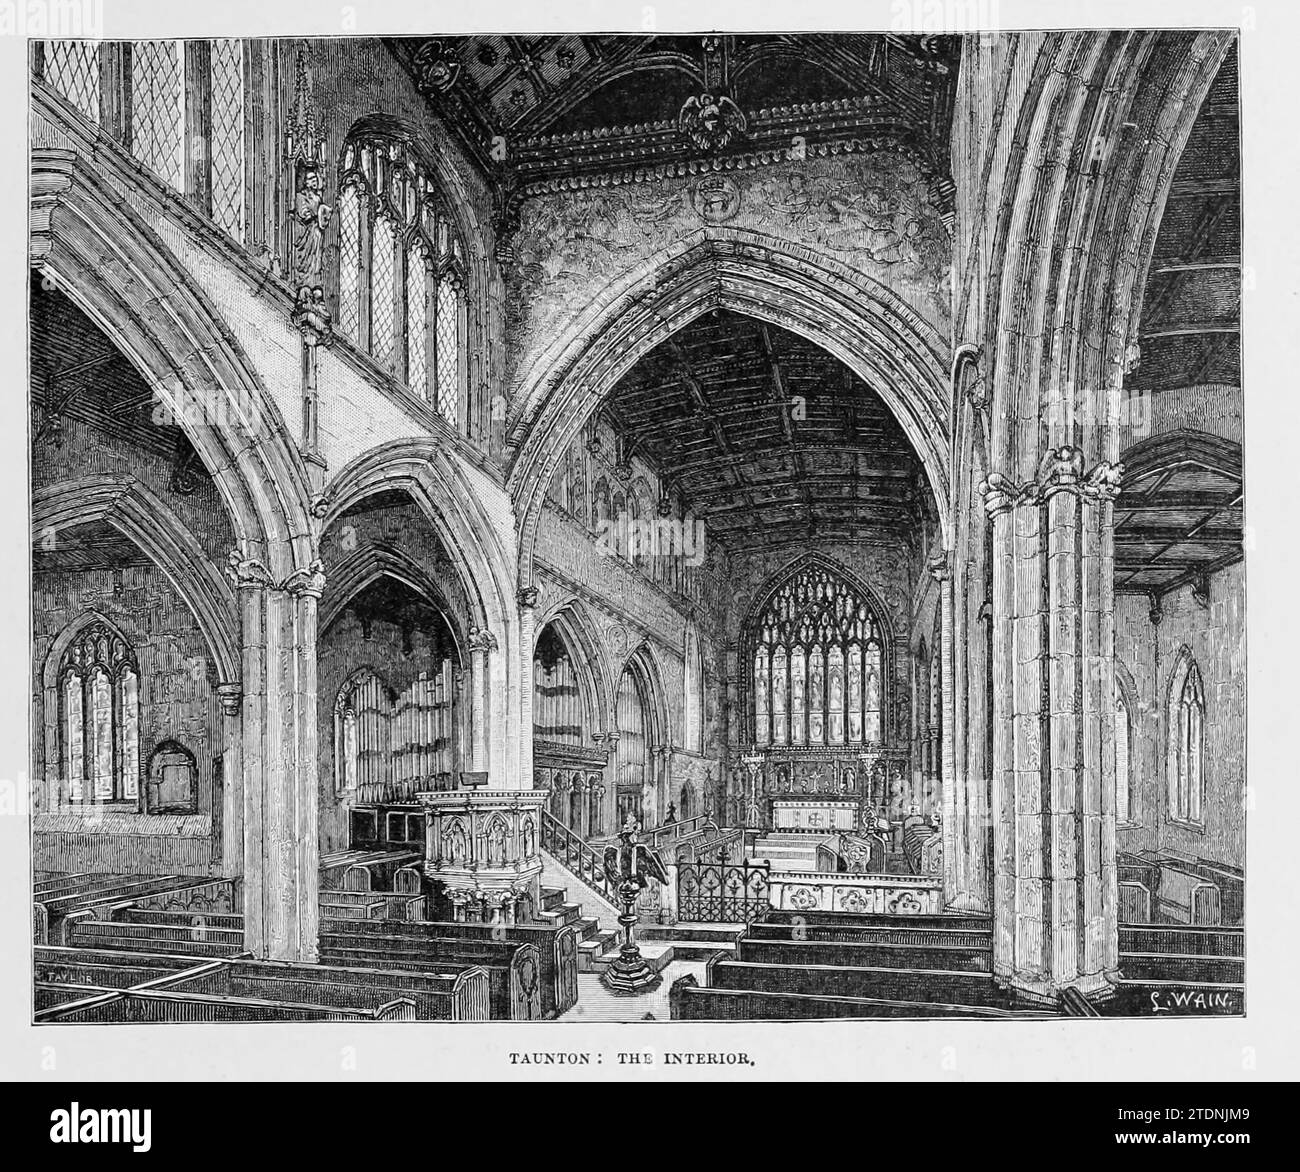 Tauton, the Interior aus dem Buch Cathedrals, Abbeys and Church of England and Wales: Deskriptive, Historical, Pictorial Band 2 von Bonney, T. G. (Thomas George), 1833–1923; Publisher London: Cassell 1890 Stockfoto